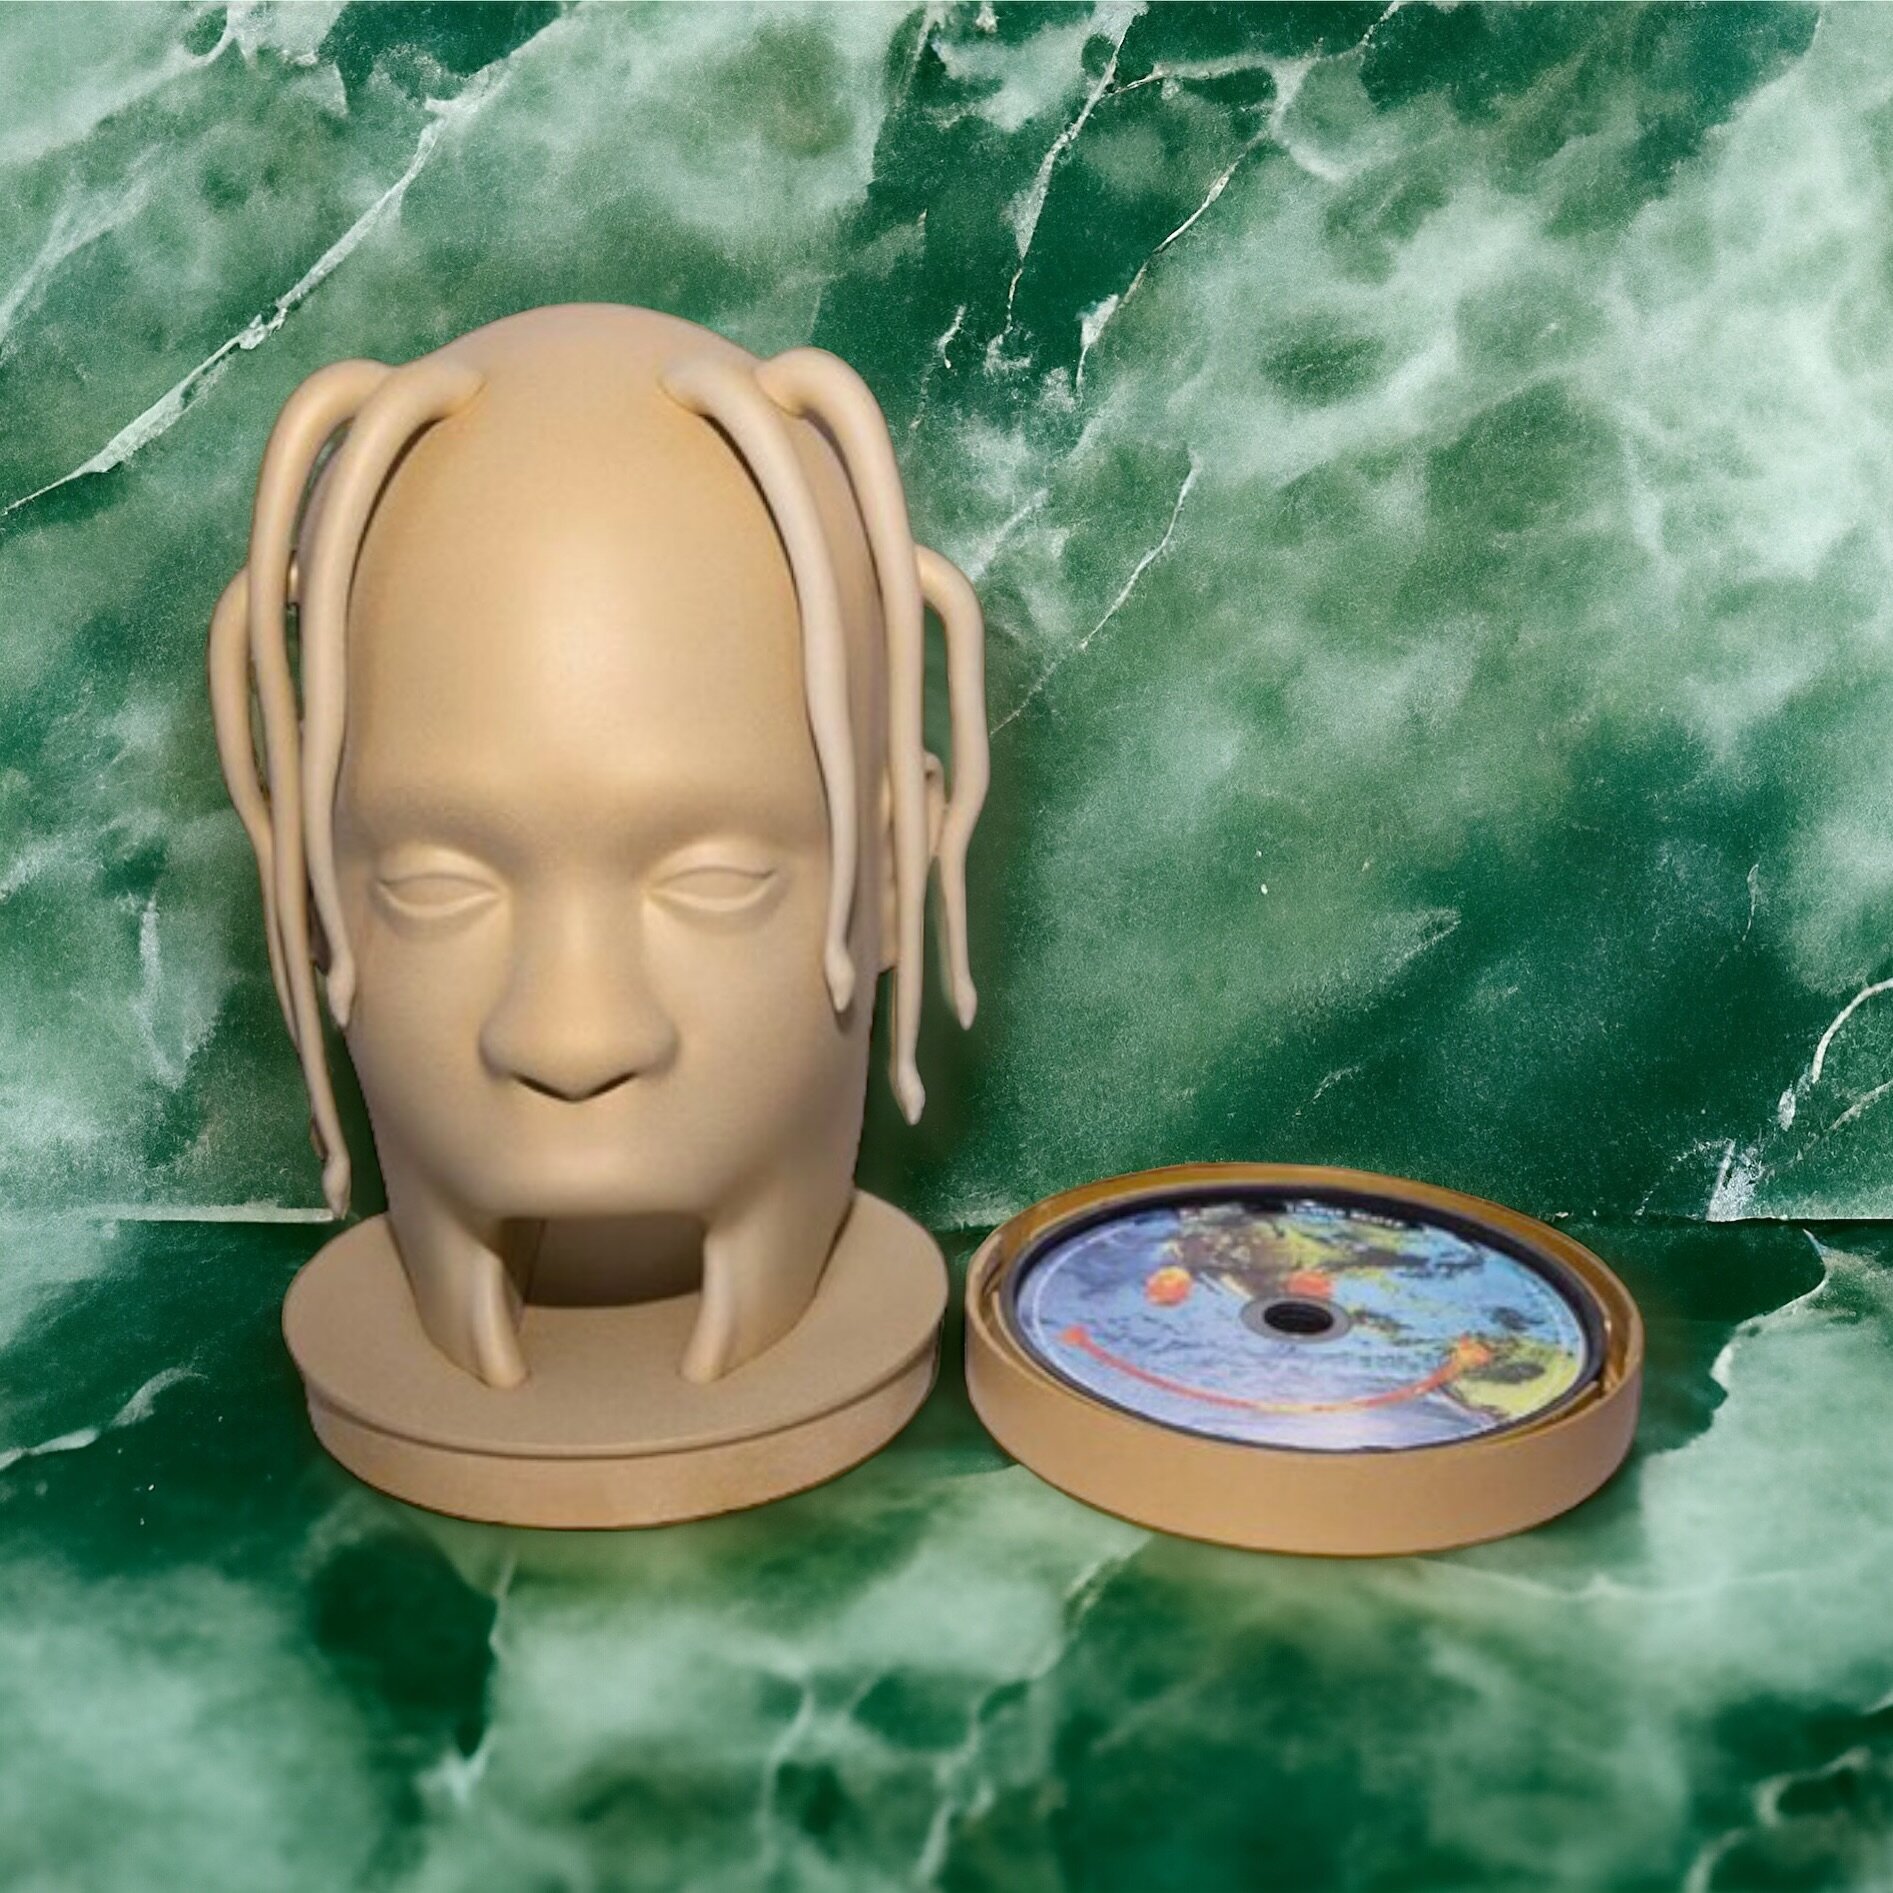 Immerse yourself in the realm of music and 3D printing with this high-resolution 3D print, capturing the essence of Travis Scott&rsquo;s &lsquo;ASTROWORLD&rsquo; album. This art piece features a two-part design: a 3D printed base representing the dis